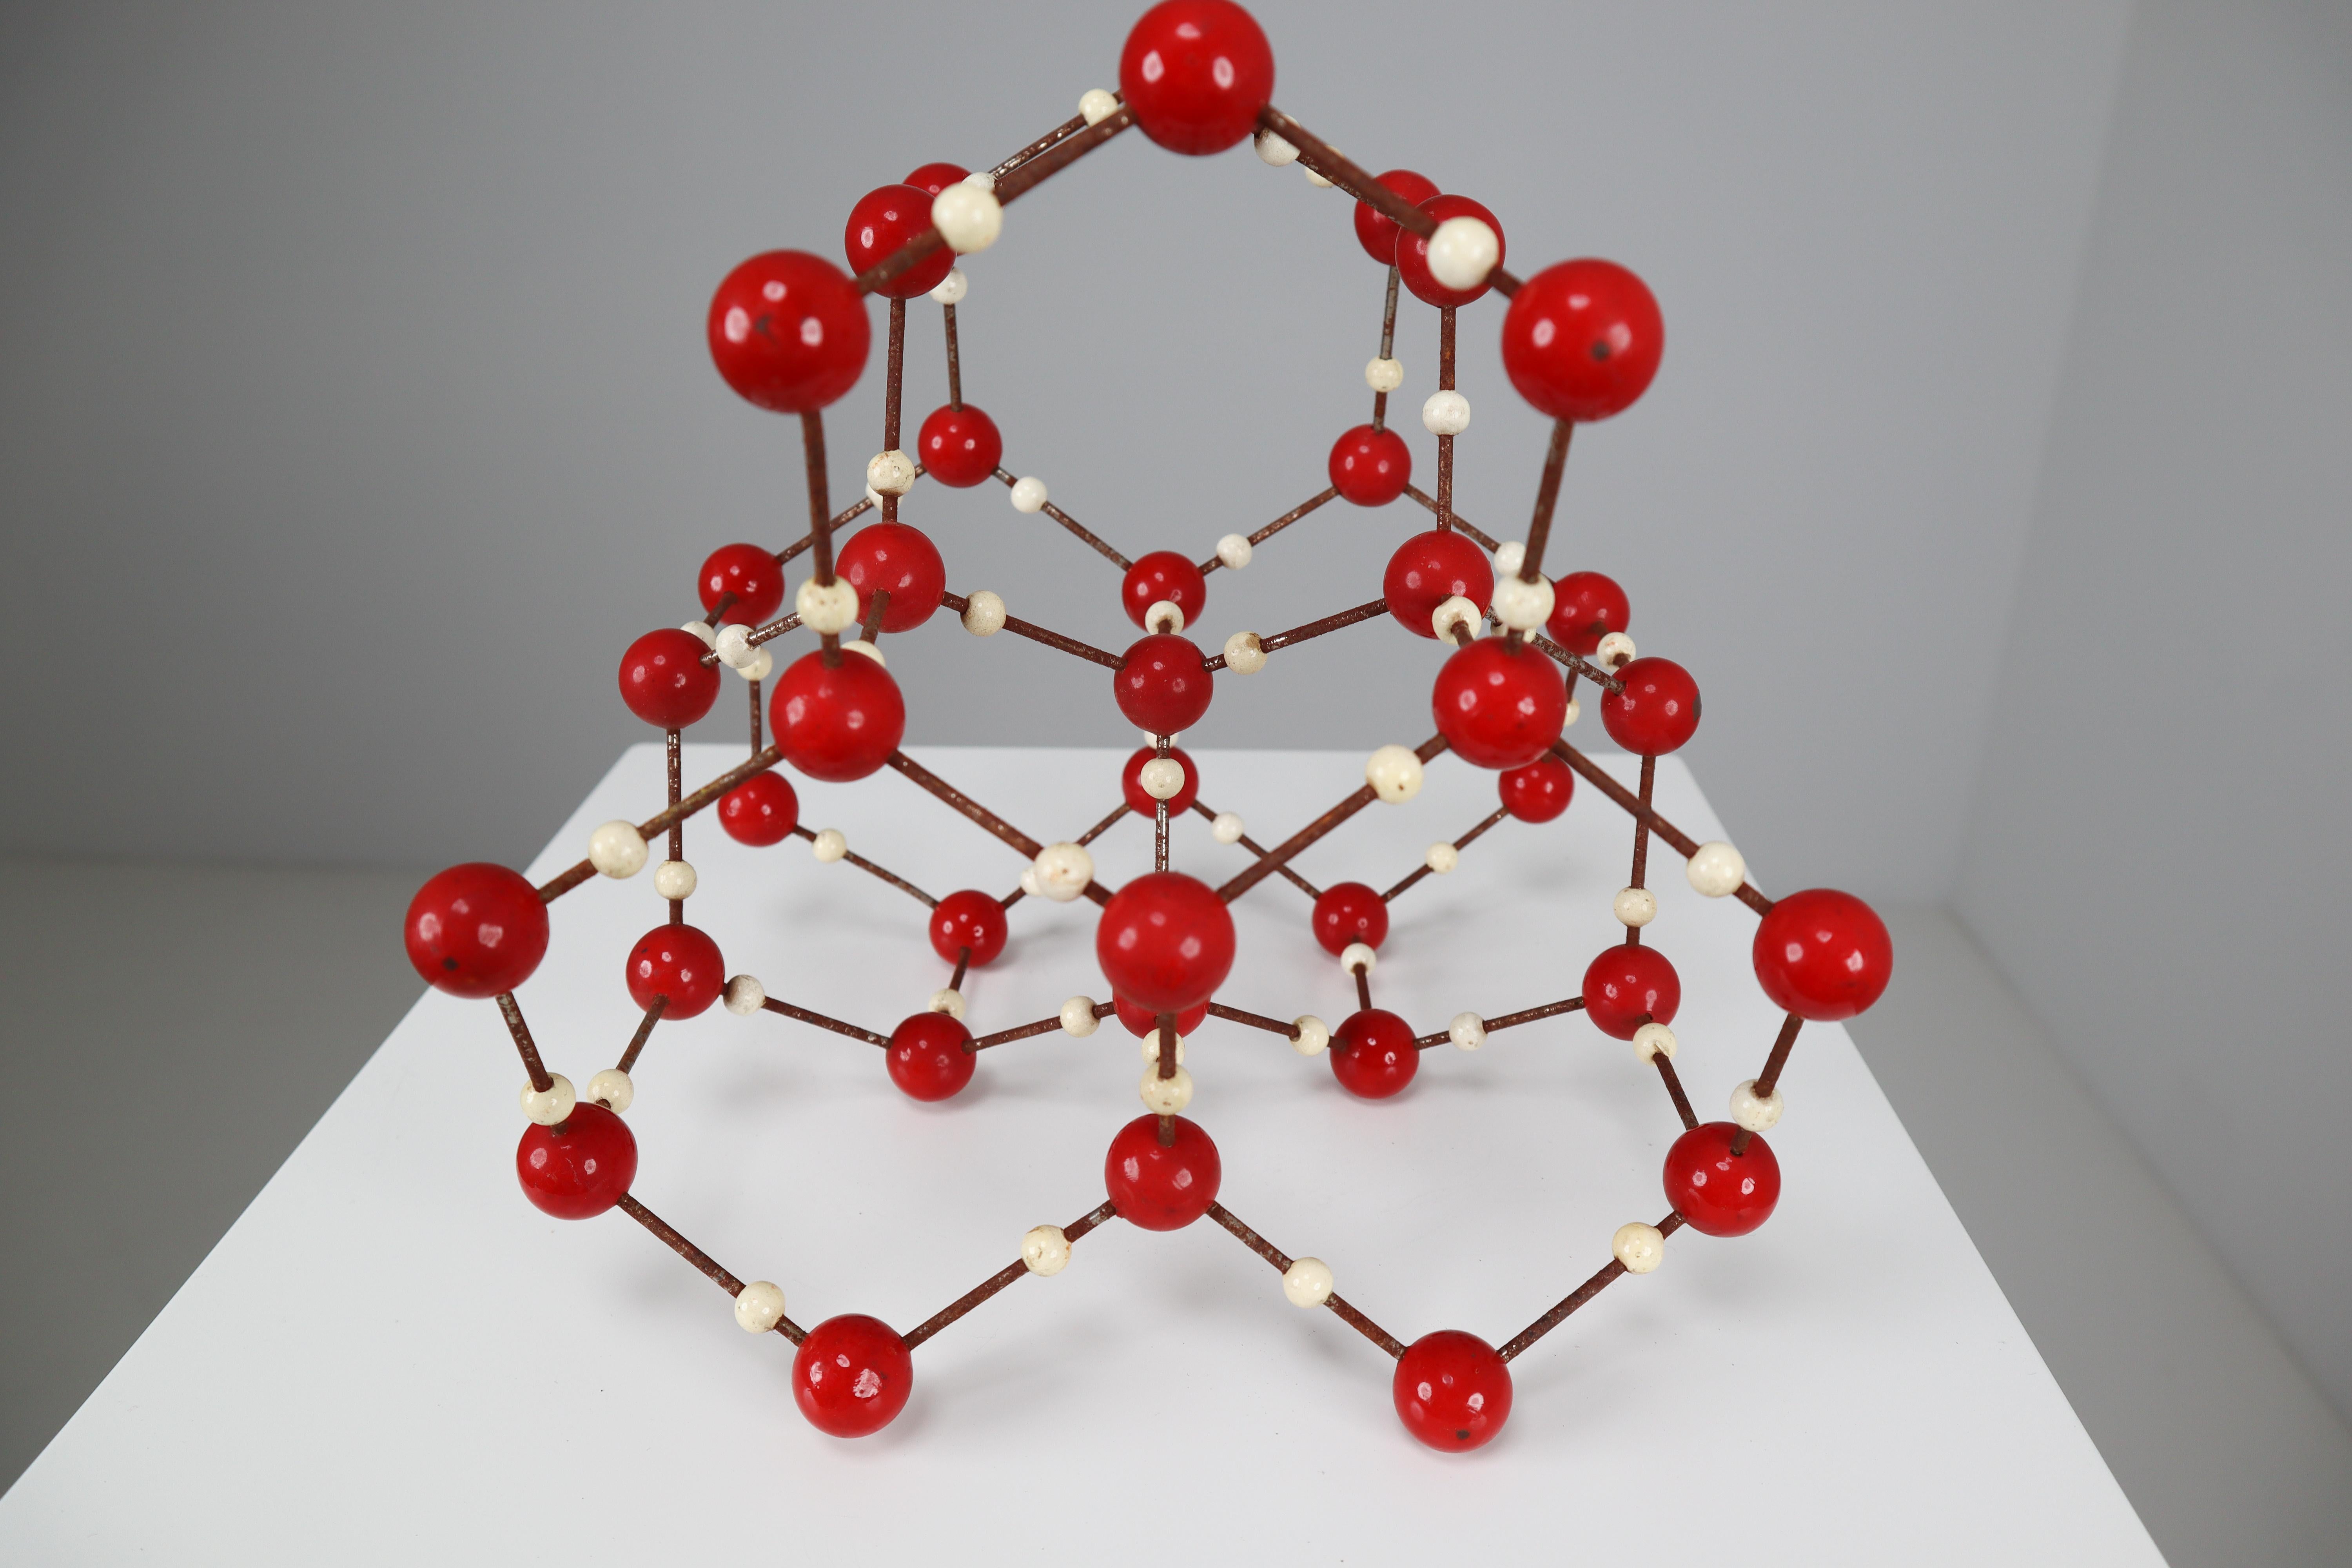 European Mid-Century Molecular Structure for Didactic Purposes Made in the 1950s